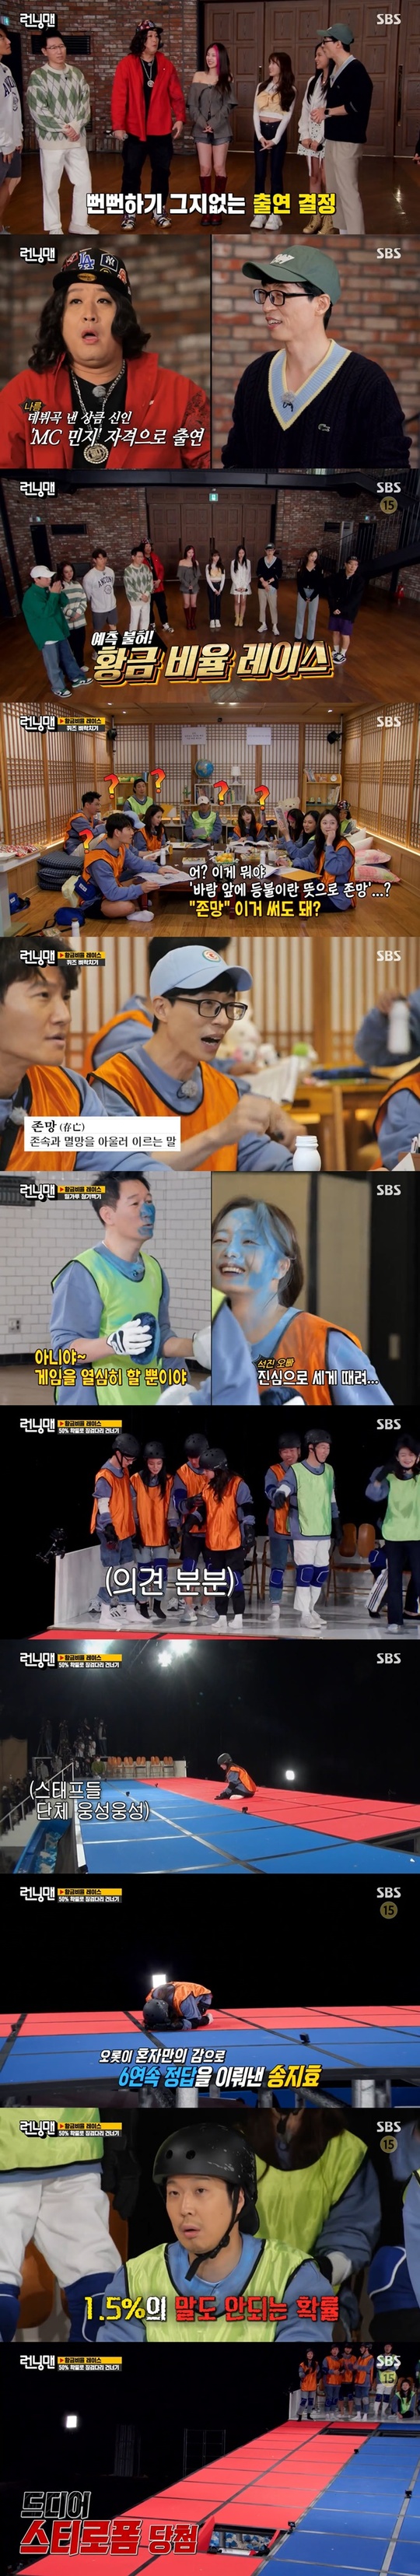 Song Ji-hyo boasted a special point in the mission, which borrowed the stepping bridge game in the Squid Game.On SBS Running Man broadcasted on October 24 Days, Jin Jung-ha, Yezi, Bibi and Luda were on the show and unfolded the double-decker race.On that day, a fresh (?) 02-year-old MC Minji (Jeong Jun-ha ViceCharacter) appeared following ITZY Yezi, space girl Luda and Bibi.The members who expected the idol were disappointed with the appearance of Jeong Jun-ha, saying, It is sour.Ji Suk-jin then said, There is no castle, come to tension.So, Jin Jun-ha said, Tell me a word.However, Yoo Jae-Suk also said, Thank you for coming out today, but Im a little bit like three people ... Singers come out, but it is too sour to be MZ generation representative.The race of the day was an unpredictable golden rate race, splitting into golden and litter ratios with a moment of Choices.It is a way to organize a game by coordinating the number of in-ones according to the number balls drawn by the production team by selecting the captain every round and giving the number to each cast.The first game was a quiz showdown, which was conducted in categories such as common sense, lions voice, and current affairs and economics newspapers.Among them, Jeon So-min said, Can I use this?Yoo Jae-Suk, who heard this, was shocked to see the tick aspect of Jeon So-min, saying, It is John (to be).In the second Game Blue White Age, only Kim Jong-guk and Ji Suk-jin teamed up to laugh at the start; the first runner, Ji Suk-jin, faced Jeon So-min.Ji Suk-jin then punched the extension, and Jeon So-min said, Seokjin is not joking but hitting hard with heart.But Ji Suk-jin excused himself: Its because Ive worked hard on Game.The third game was the 50% chance of following the play in the Netflix original series Squid Game, and the stepping bridge was crossed.Yoo Jae-Suk, who became the first batter, shivered, If you fall in the drama, you die.Song Ji-hyo crossed one step to his own Choices and gave the correct answer for four consecutive times, so the crew couldnt hide their elasticity.Song Ji-hyo then set a milestone of six consecutive successes with a 1.5 percent chance.Song Ji-hyo was given a break for a while, and Song Ji-hyo was able to advance again through 0.7% probability and achieved seven consecutive successes.Finally, Song Ji-hyos correct answer march stopped at the eighth; Song Ji-hyos performance gave the victory to the Song Ji-hyo team.The final win went to the top eight, and the penalties went to Yezi, Jeon So-min and Luda.